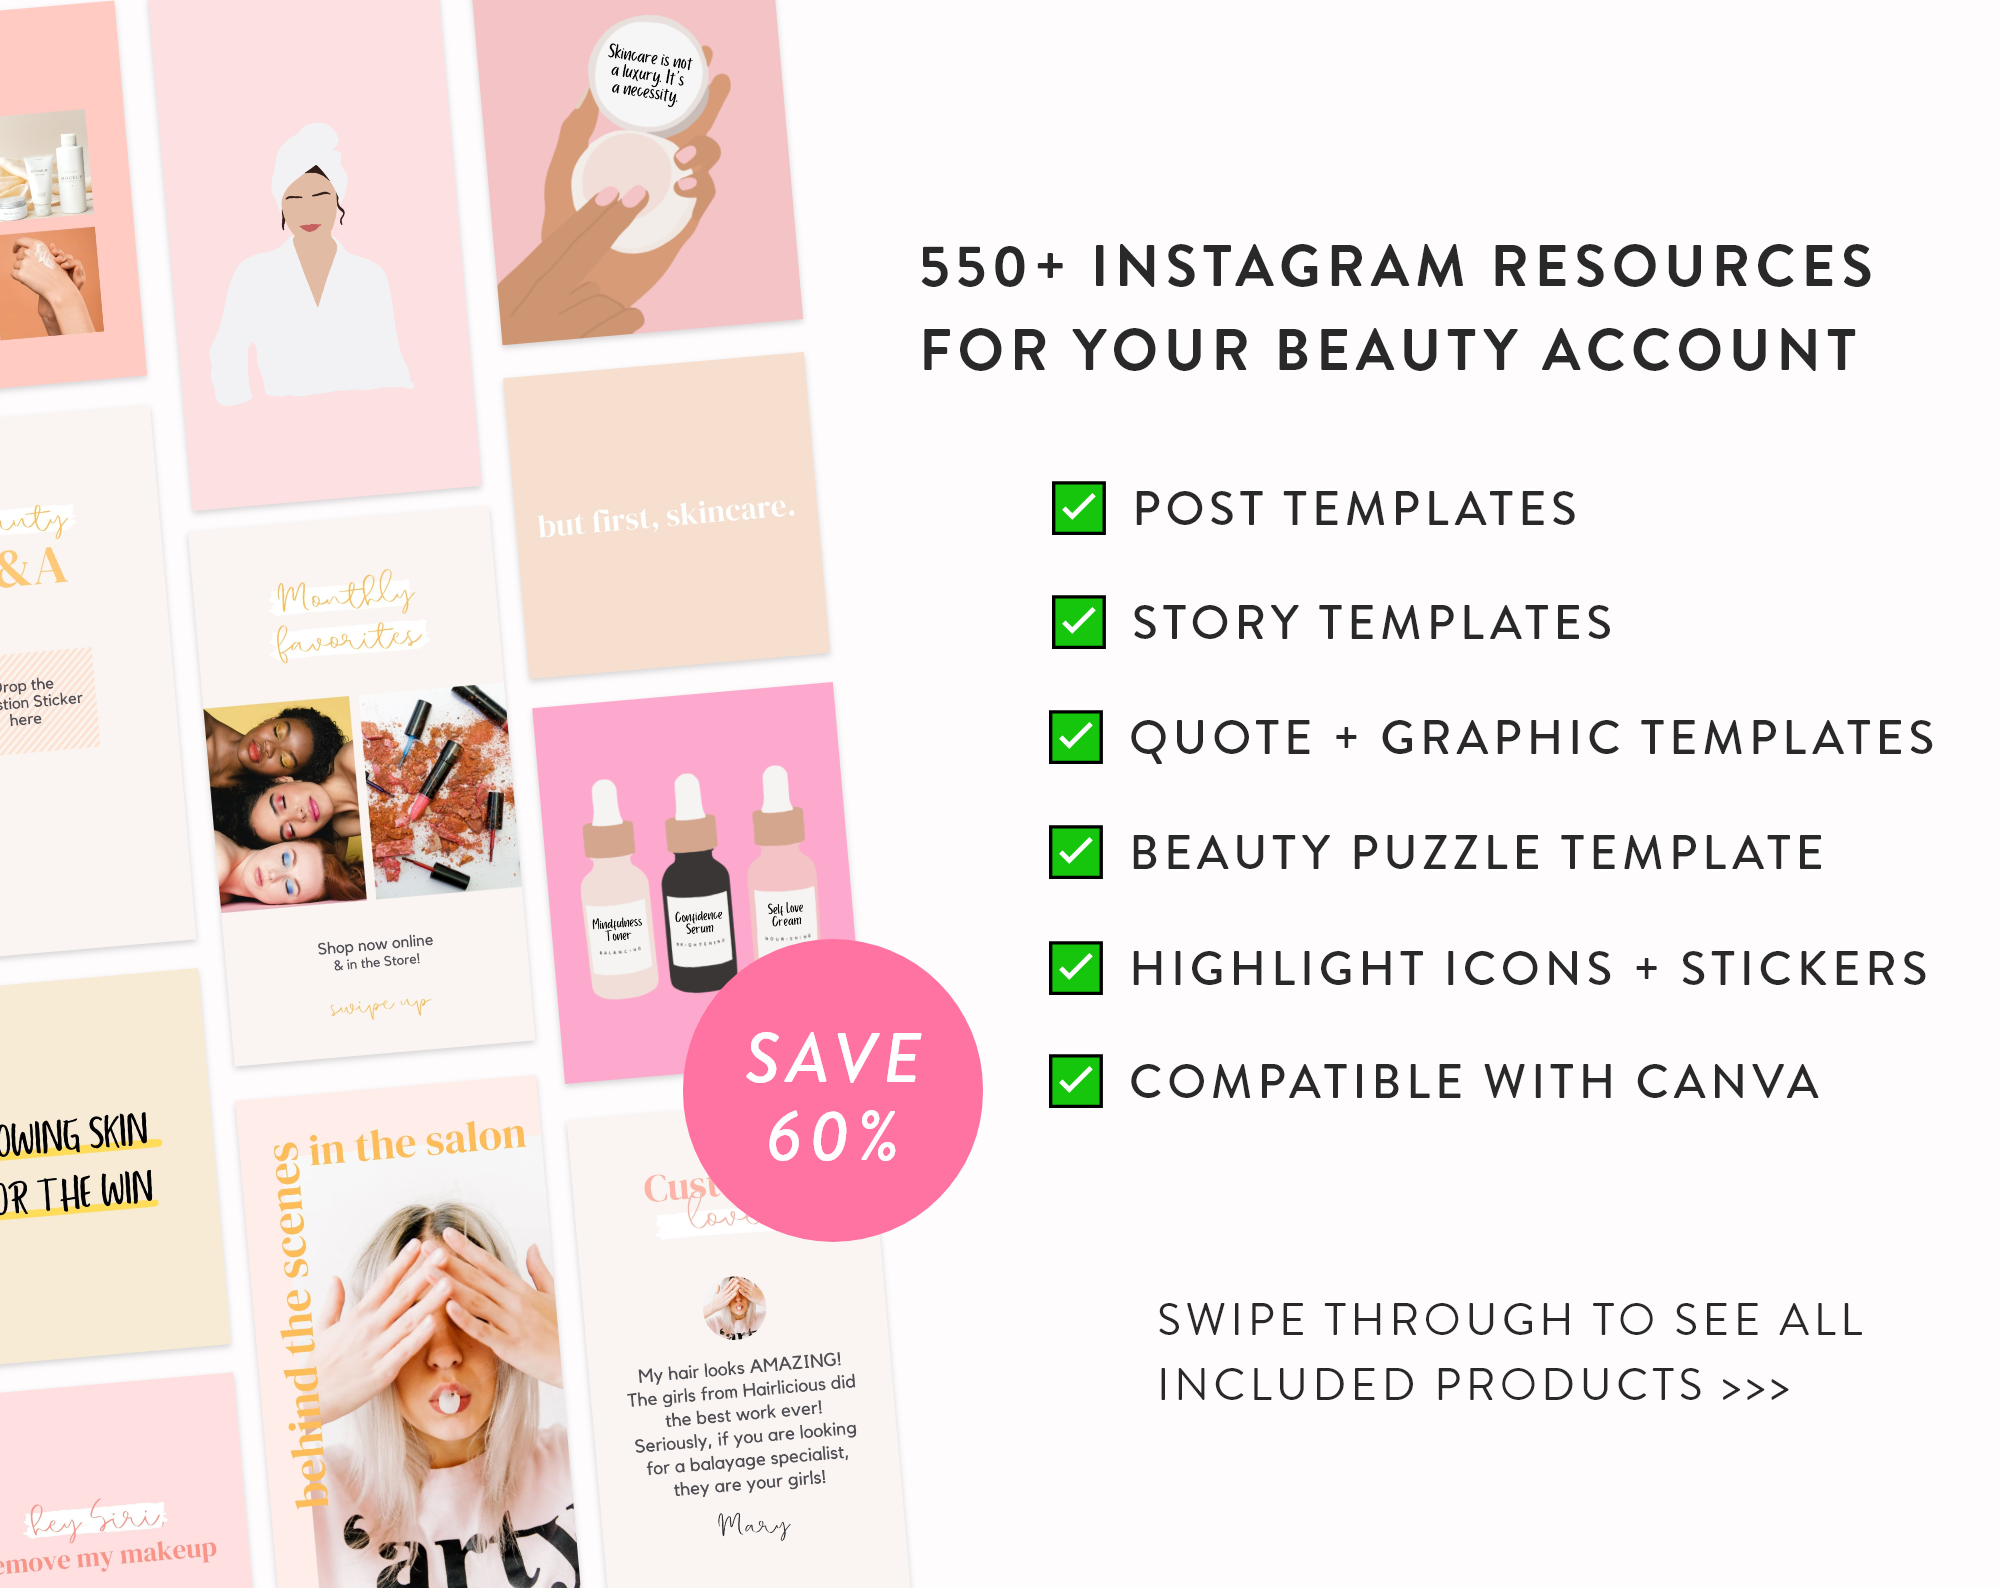 beauty-boost-Instagram-bündle-for-canva-templates-whats-included